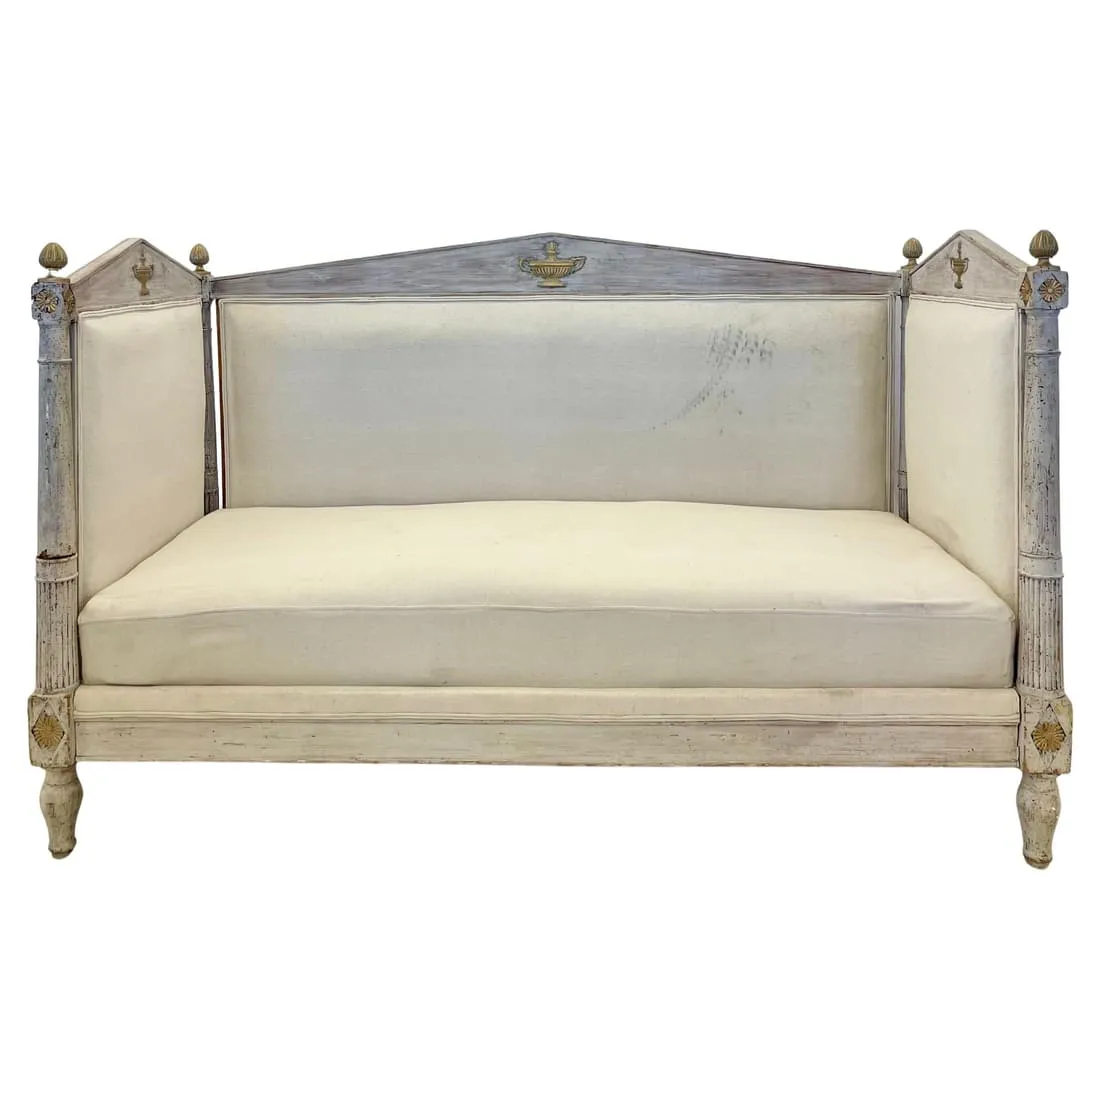 18th-century Swedish Gustavian paint-decorated sofa or daybed, estimated at $19,000-$23,000.